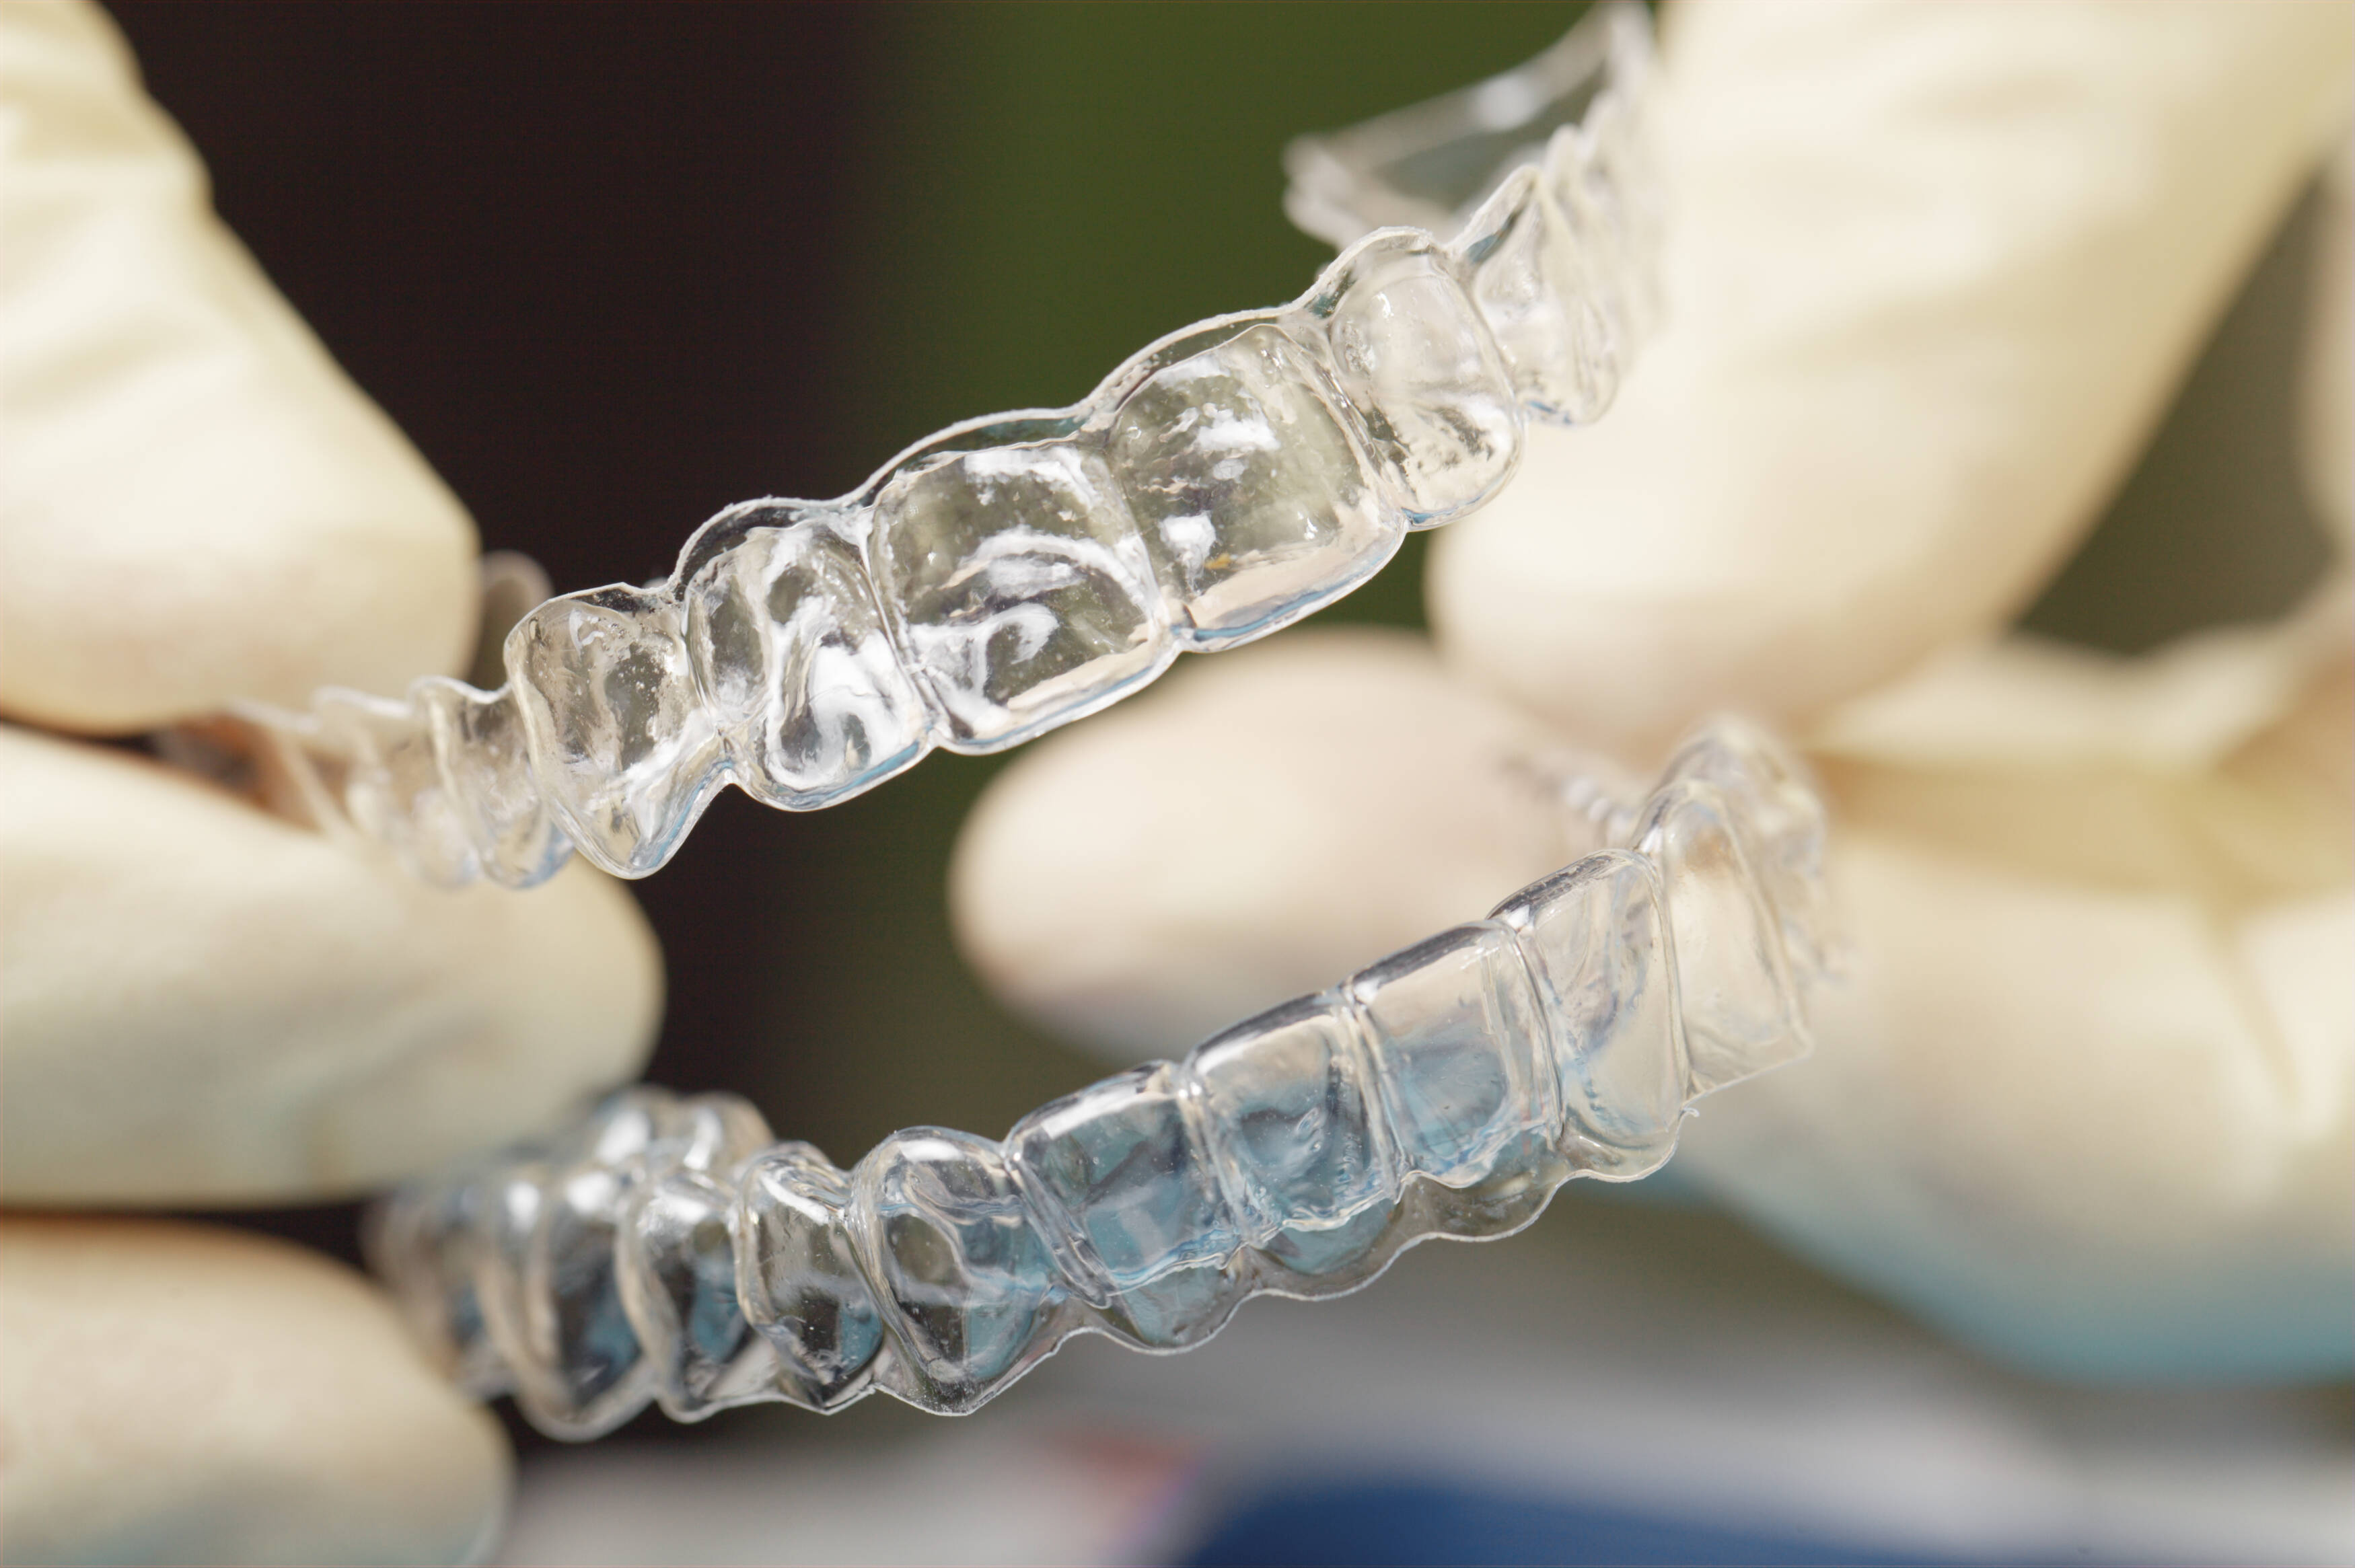 can wearing a mouthguard make bruxism worse